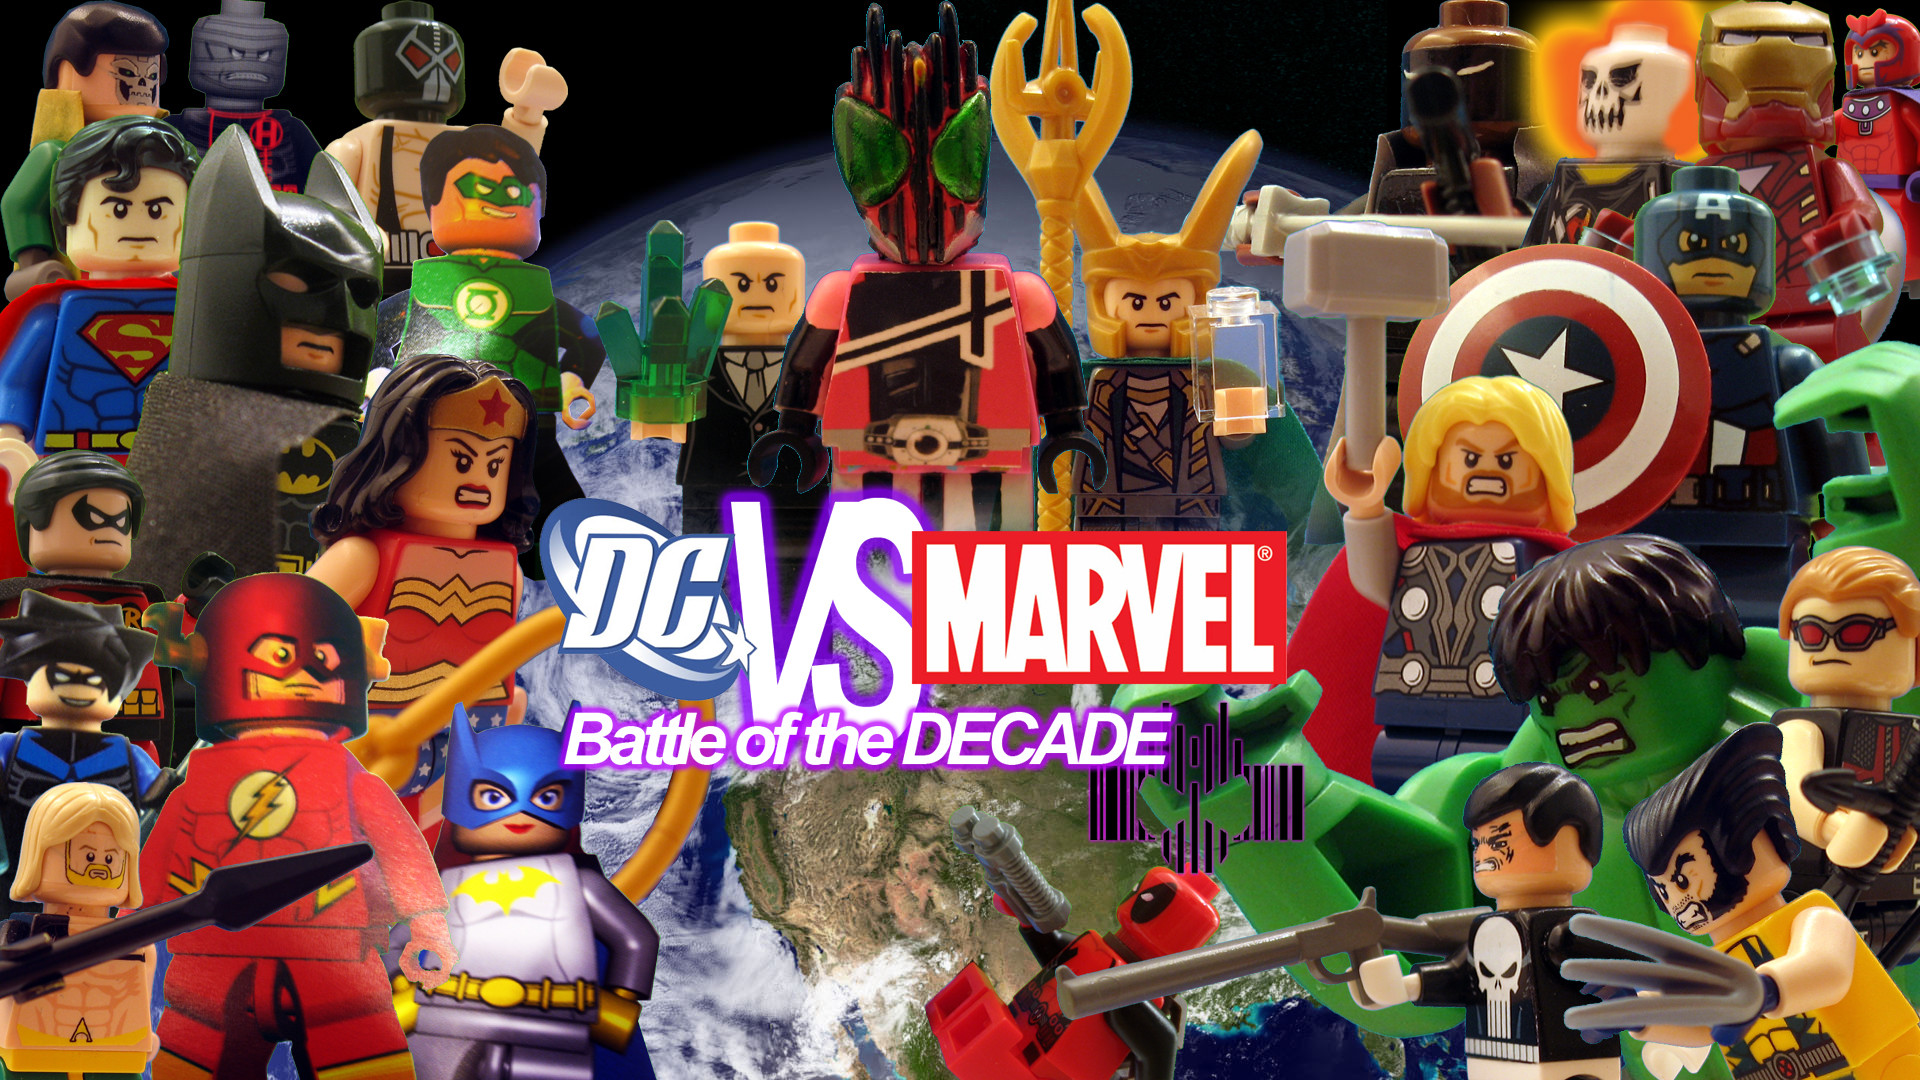 1920x1080 ... LEGO DC VS MARVEL: Battle of the Decade Wallpaper by Digger318